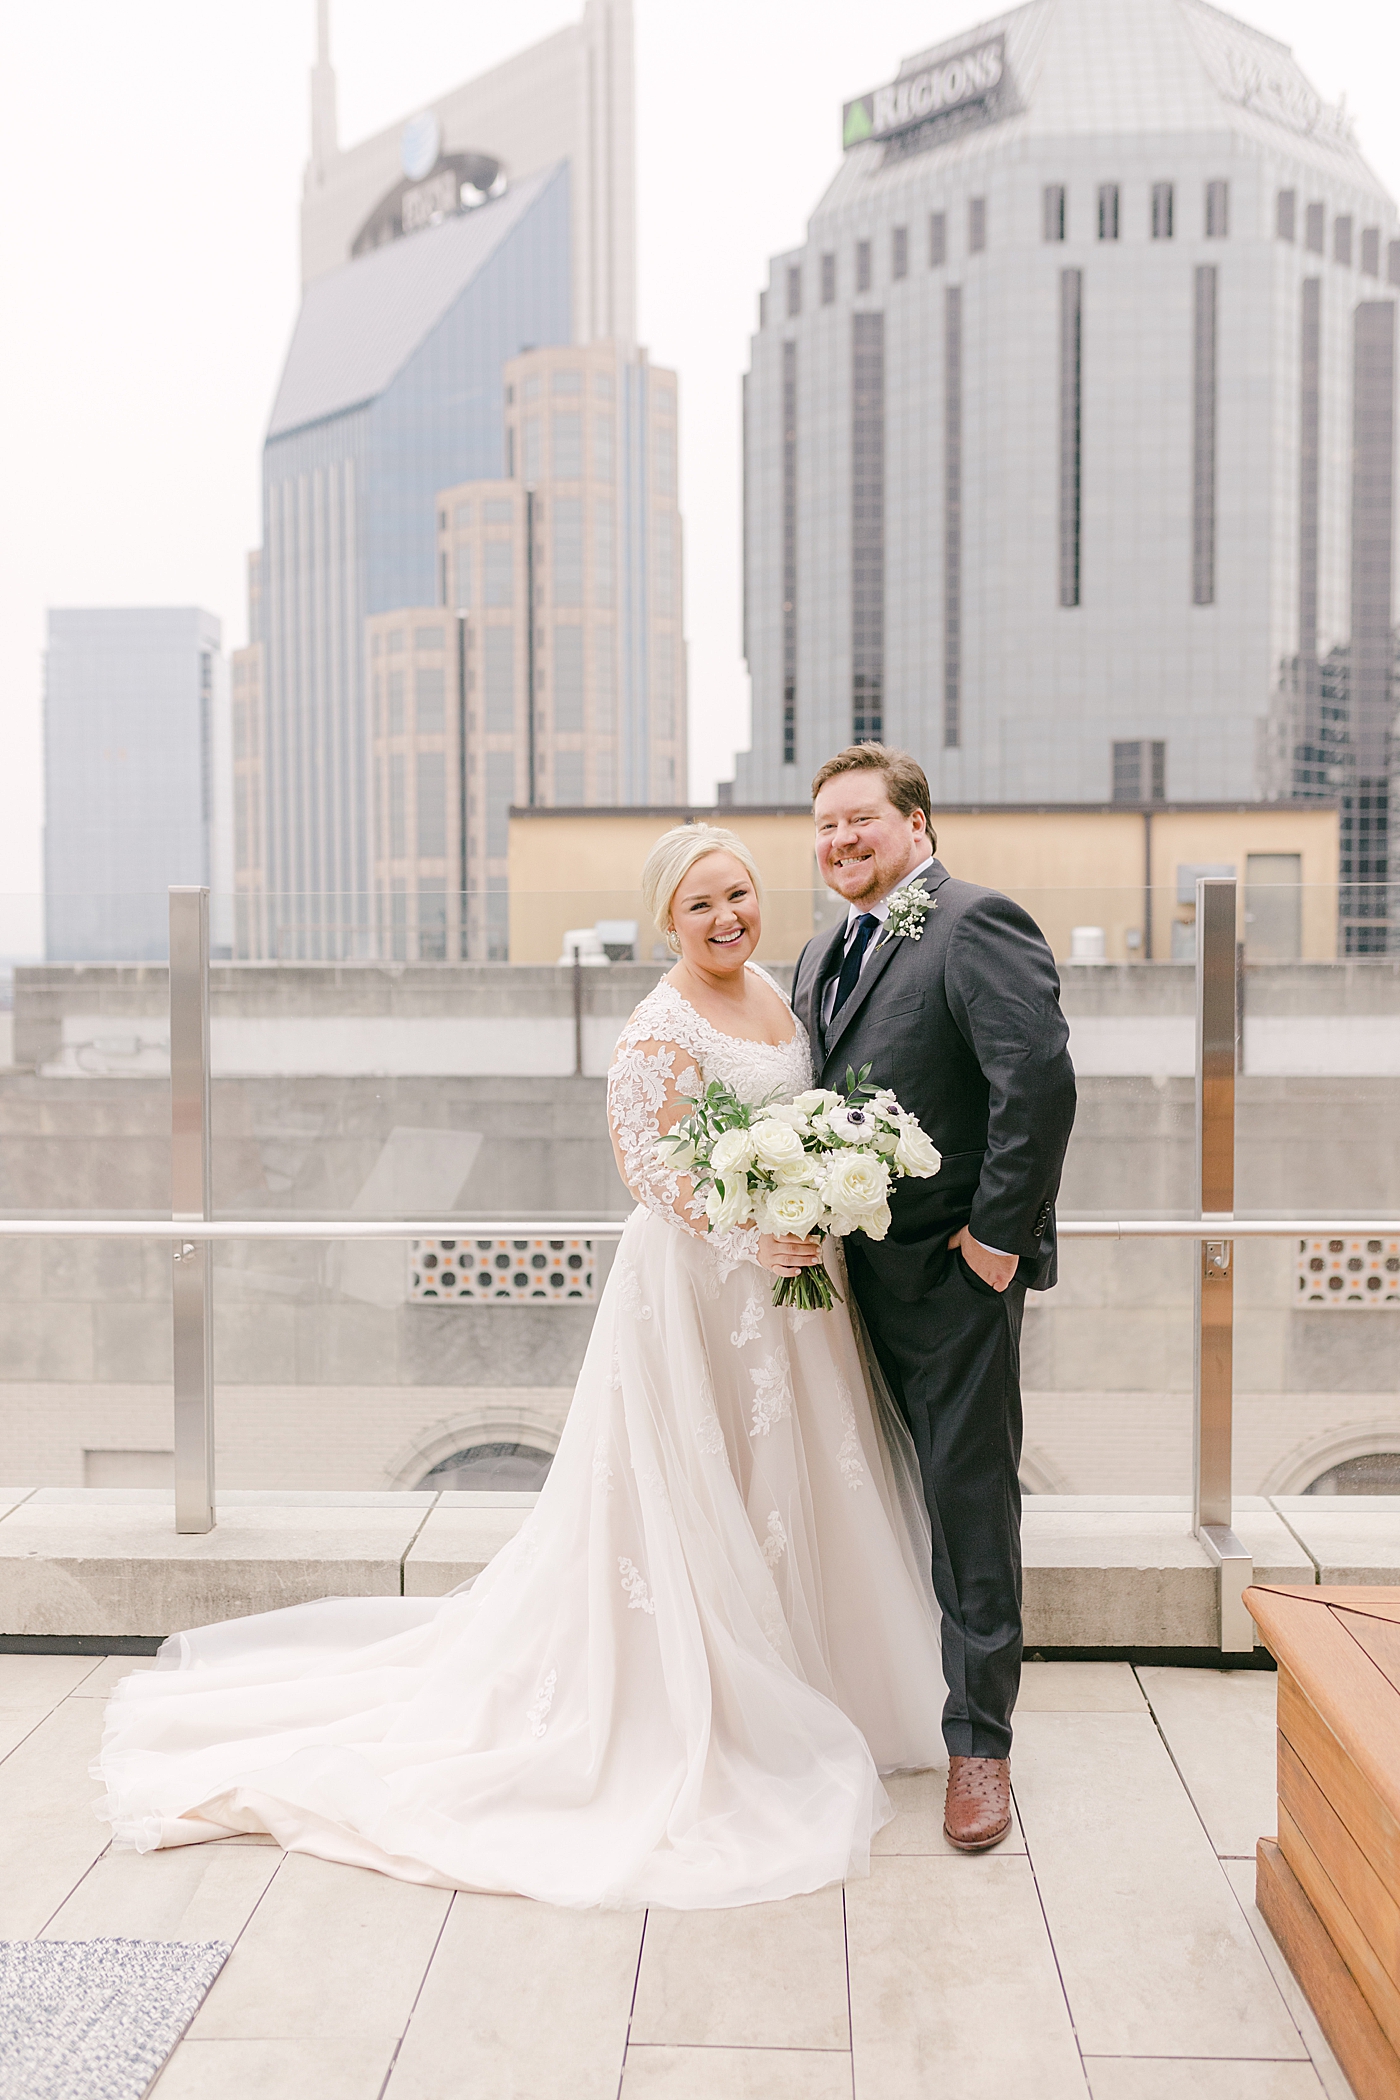 Bride and groom smiling on a rooftop in Nashville | Photo by Hope Helmuth Photography